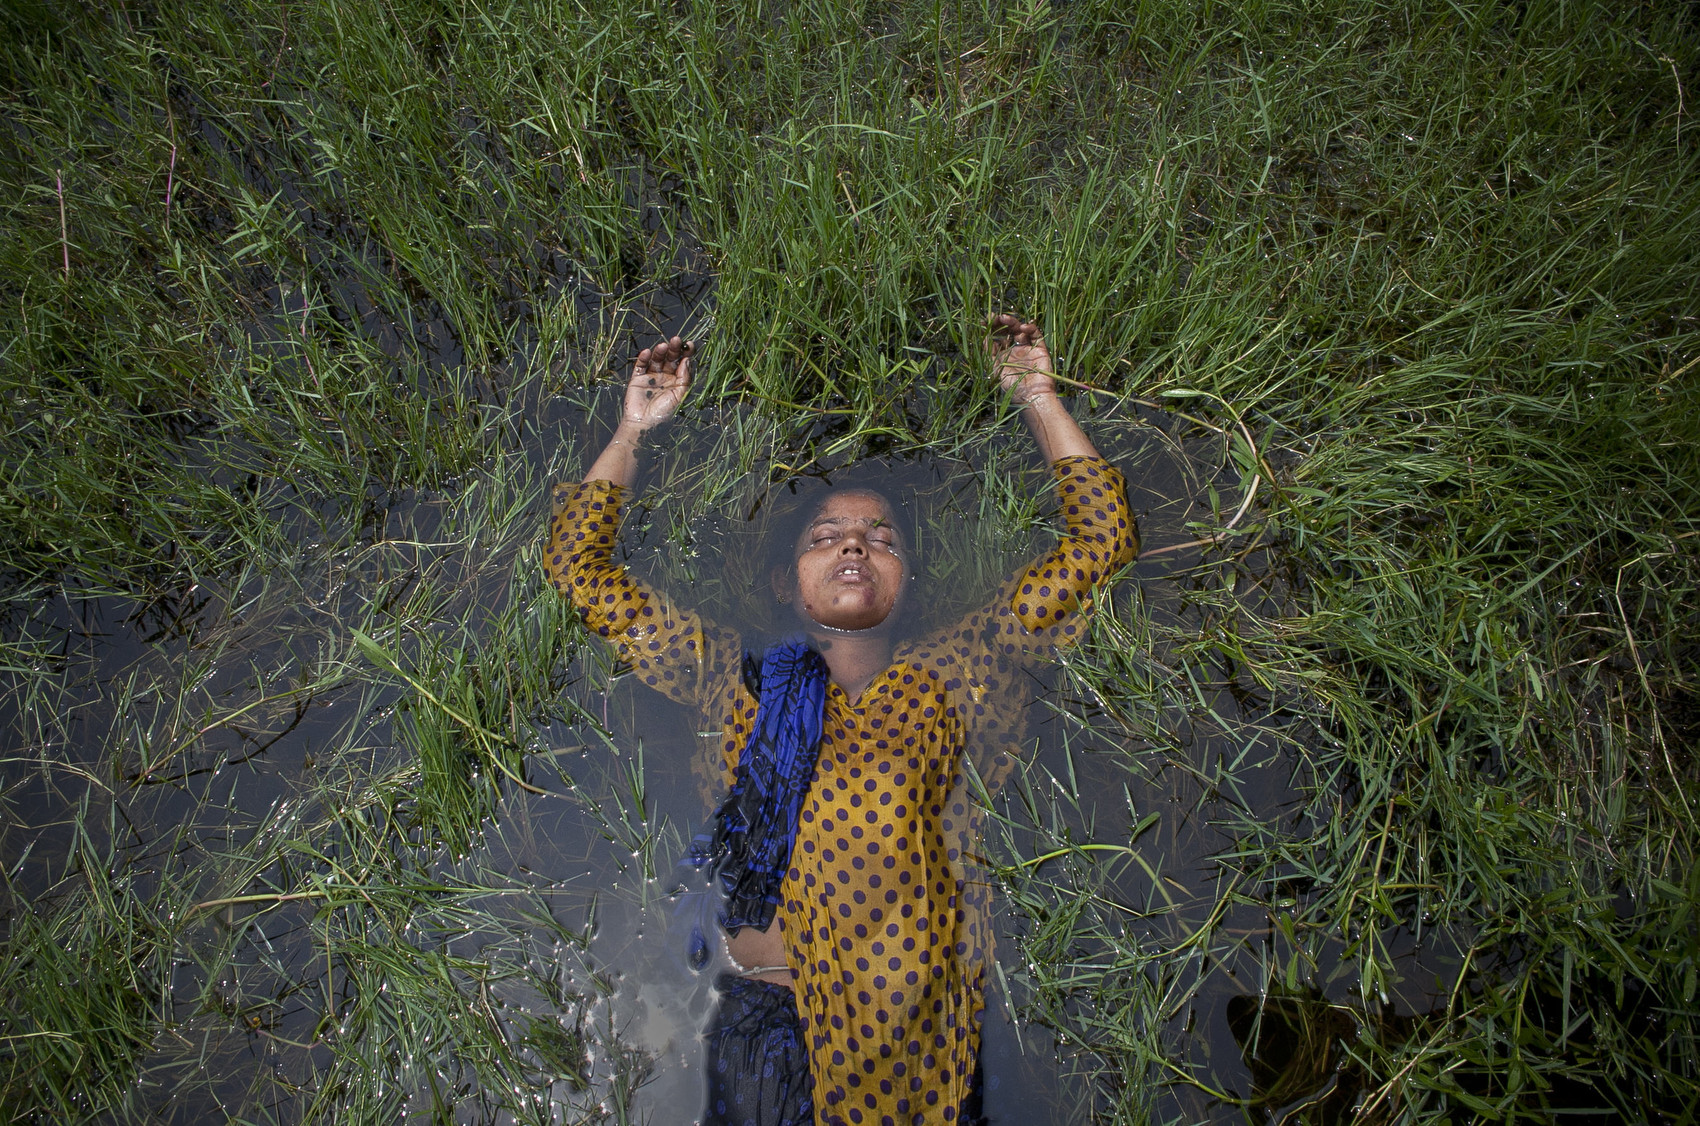 35 year old patient Barvine Akhter lies in a rice paddy outside the intake center of Pabna Mental Hospital in Pabna, Bangladesh. Mental health in Bangladesh is largely neglected and under financed, and the stigma of mental health is huge. In rural areas there are few doctors and families generally take the patient to a traditional healer first, who usually tries to exorcize the Jinn (spirits) with holy water and versus from the Koran. Families who have a mentally ill family member sometimes tie them up out of desperation and lack of education and options. There is only one government run mental hospital with 500 beds in the entire country. Less than 0.5% of government health budget is spent for mental health. 